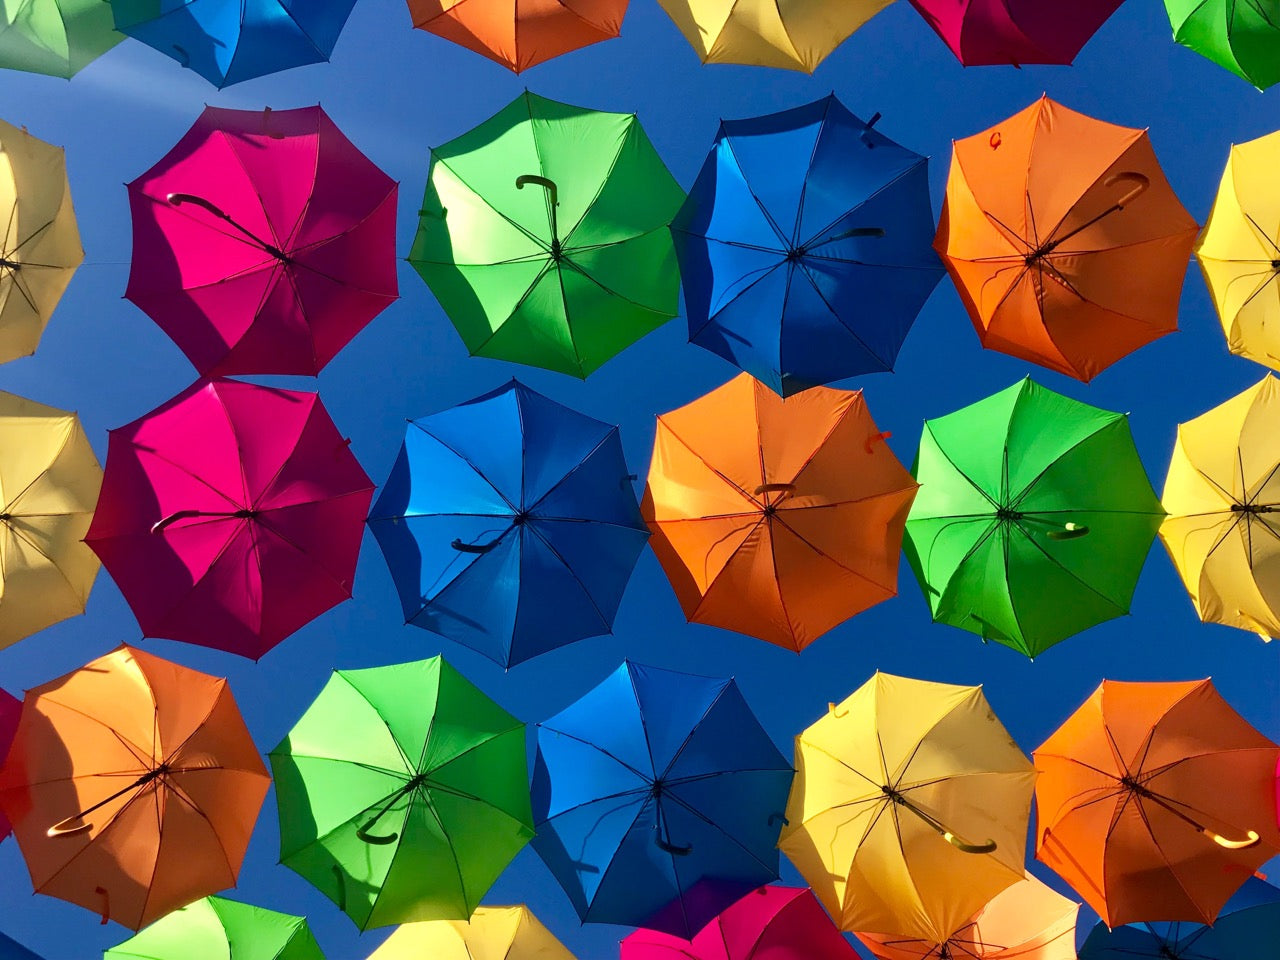 Making a Statement: The Unparalleled Advantages of Promotional Custom Umbrellas for Corporate Merchandising